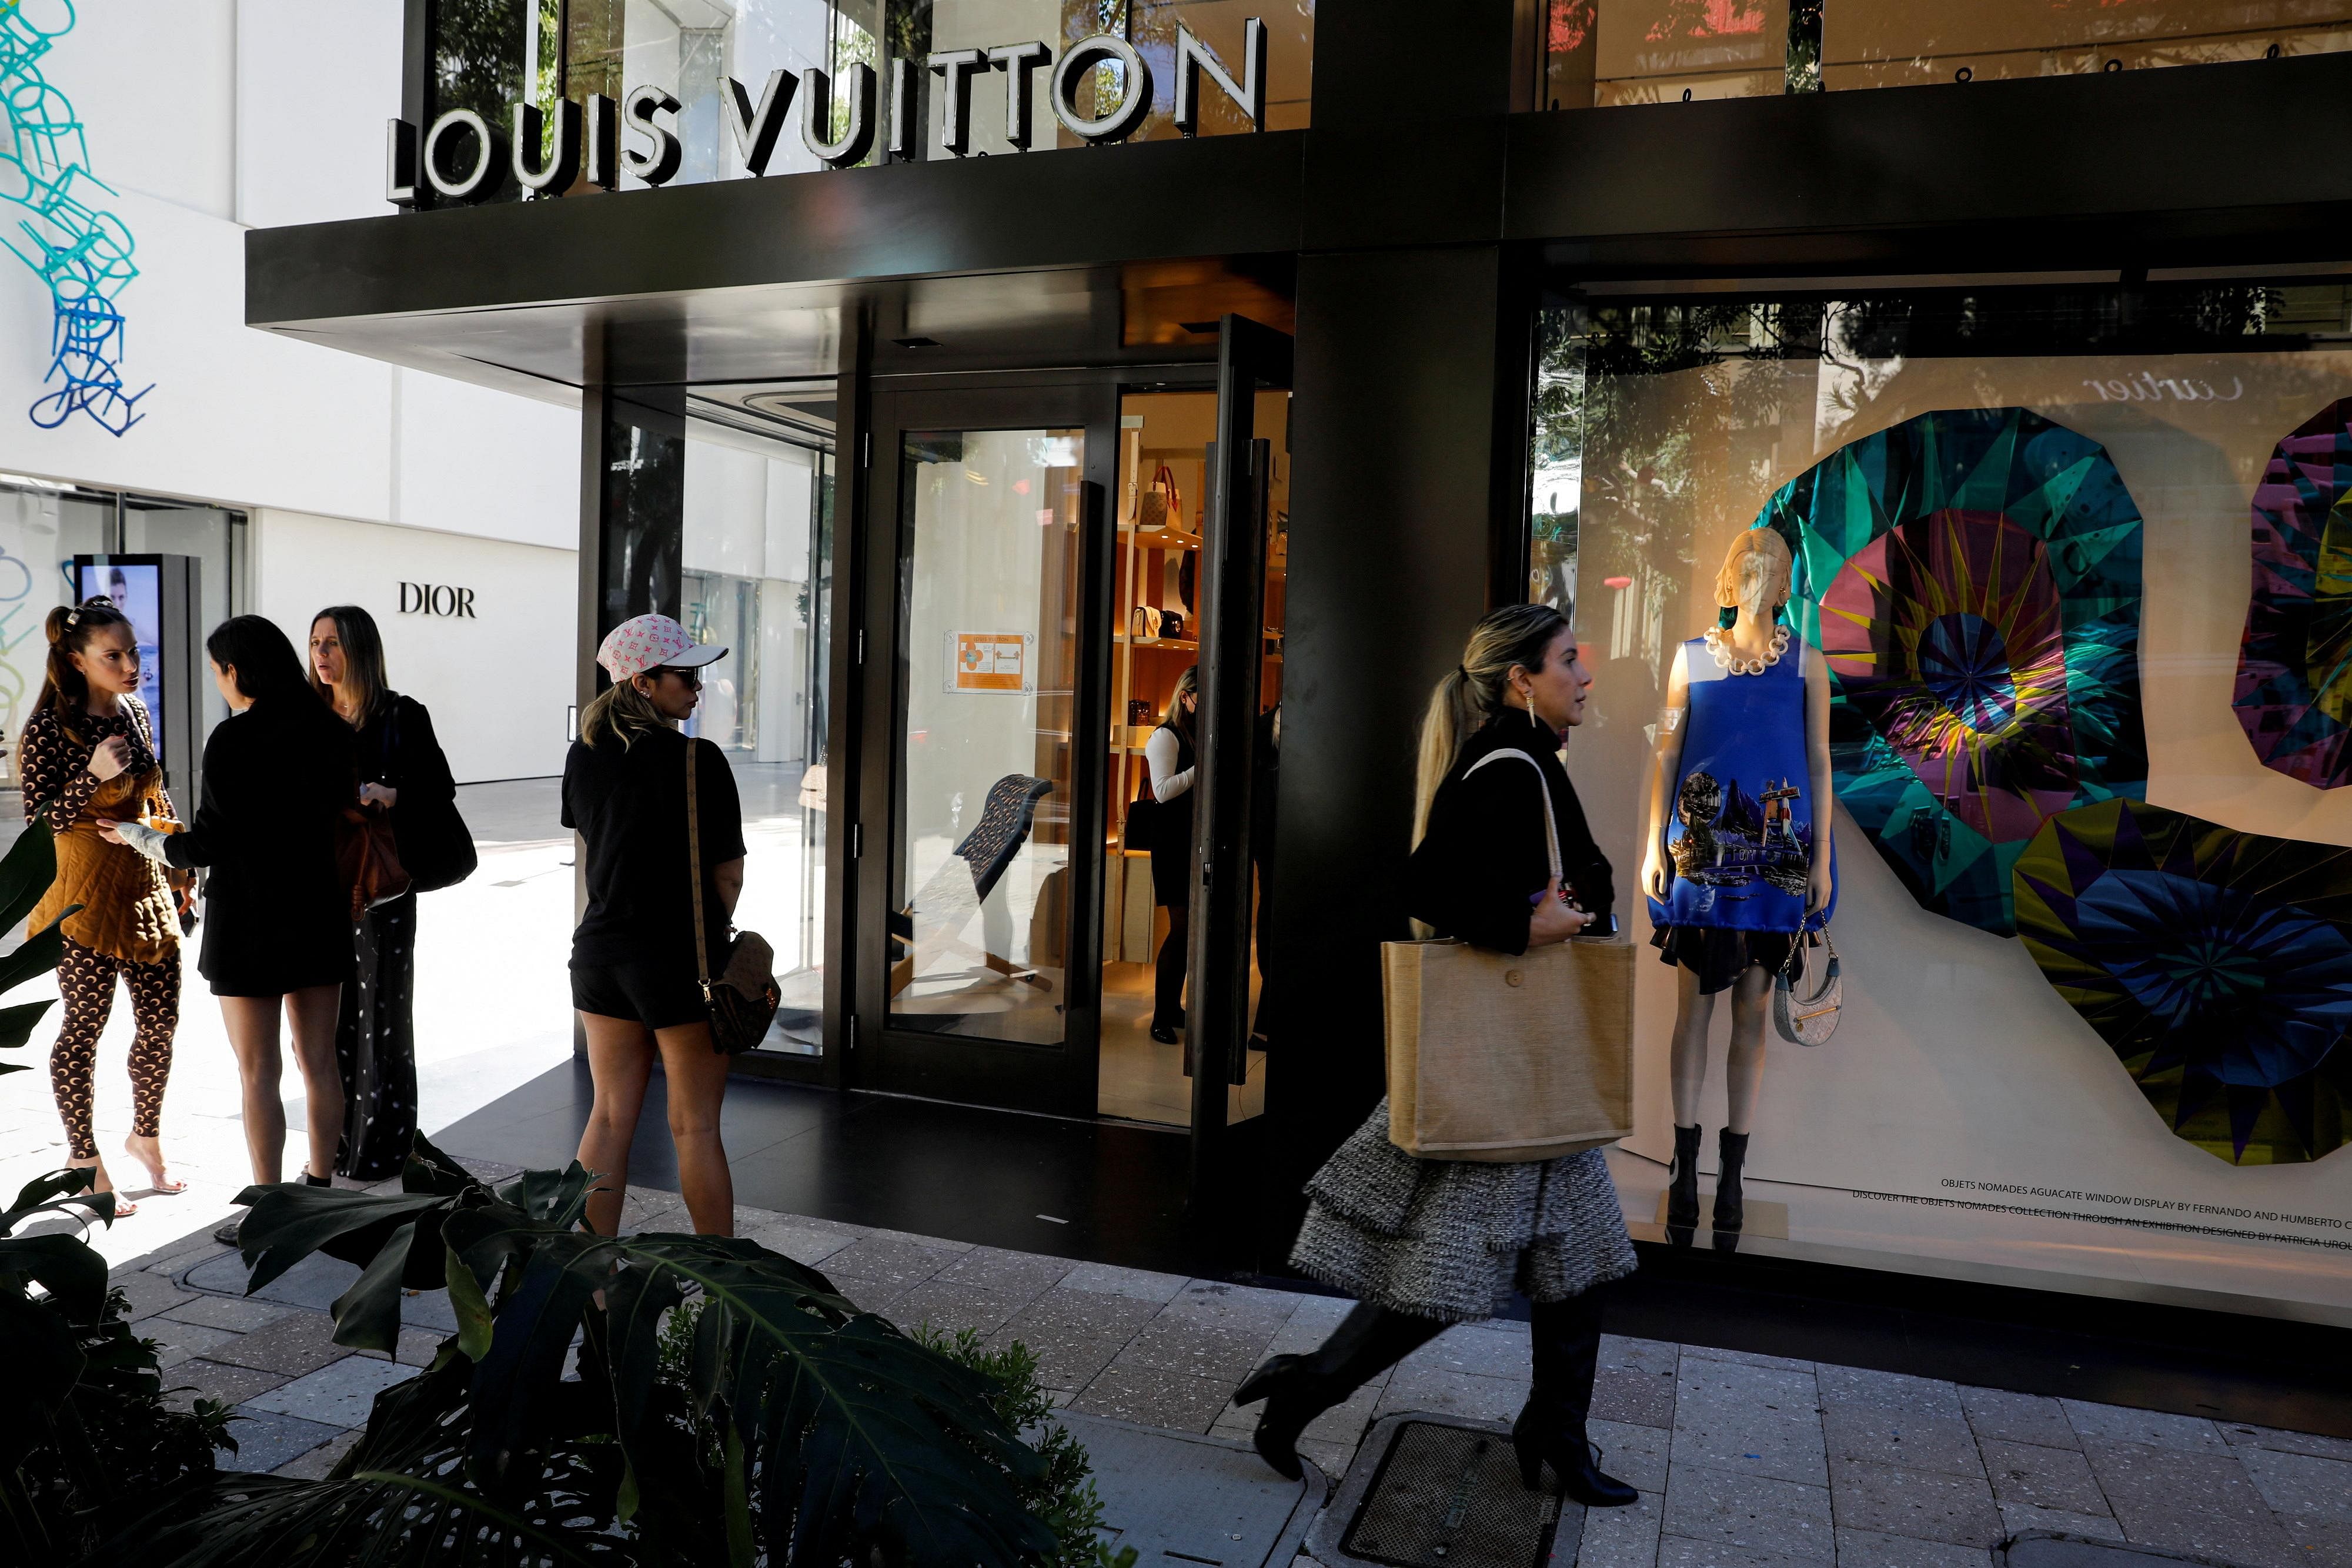 LVMH Share Price: What are Analysts Predicting for This French Luxury  Giant? 